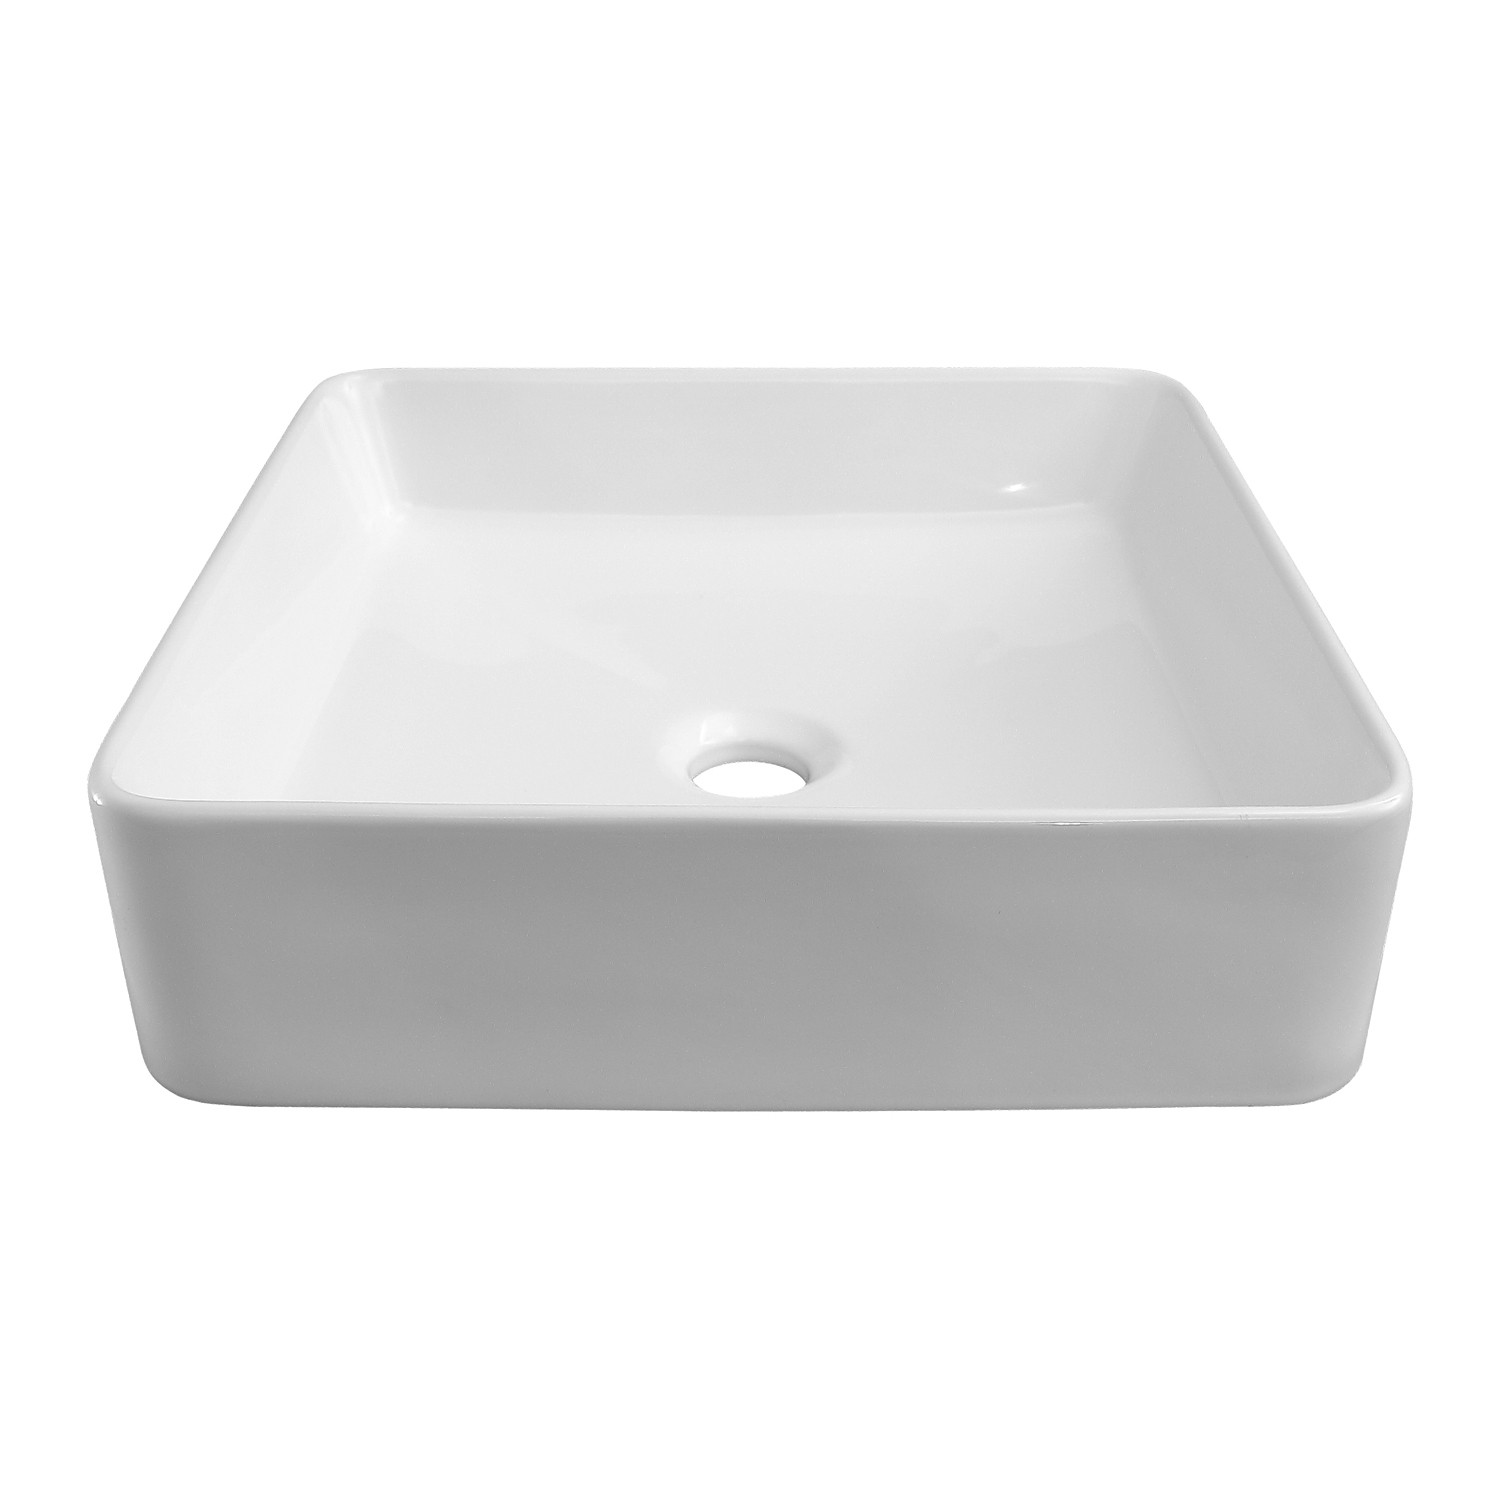 BARCLAY 4-454WH LAUER 15 7/8 INCH SINGLE BASIN ABOVE COUNTER BATHROOM SINK - WHITE